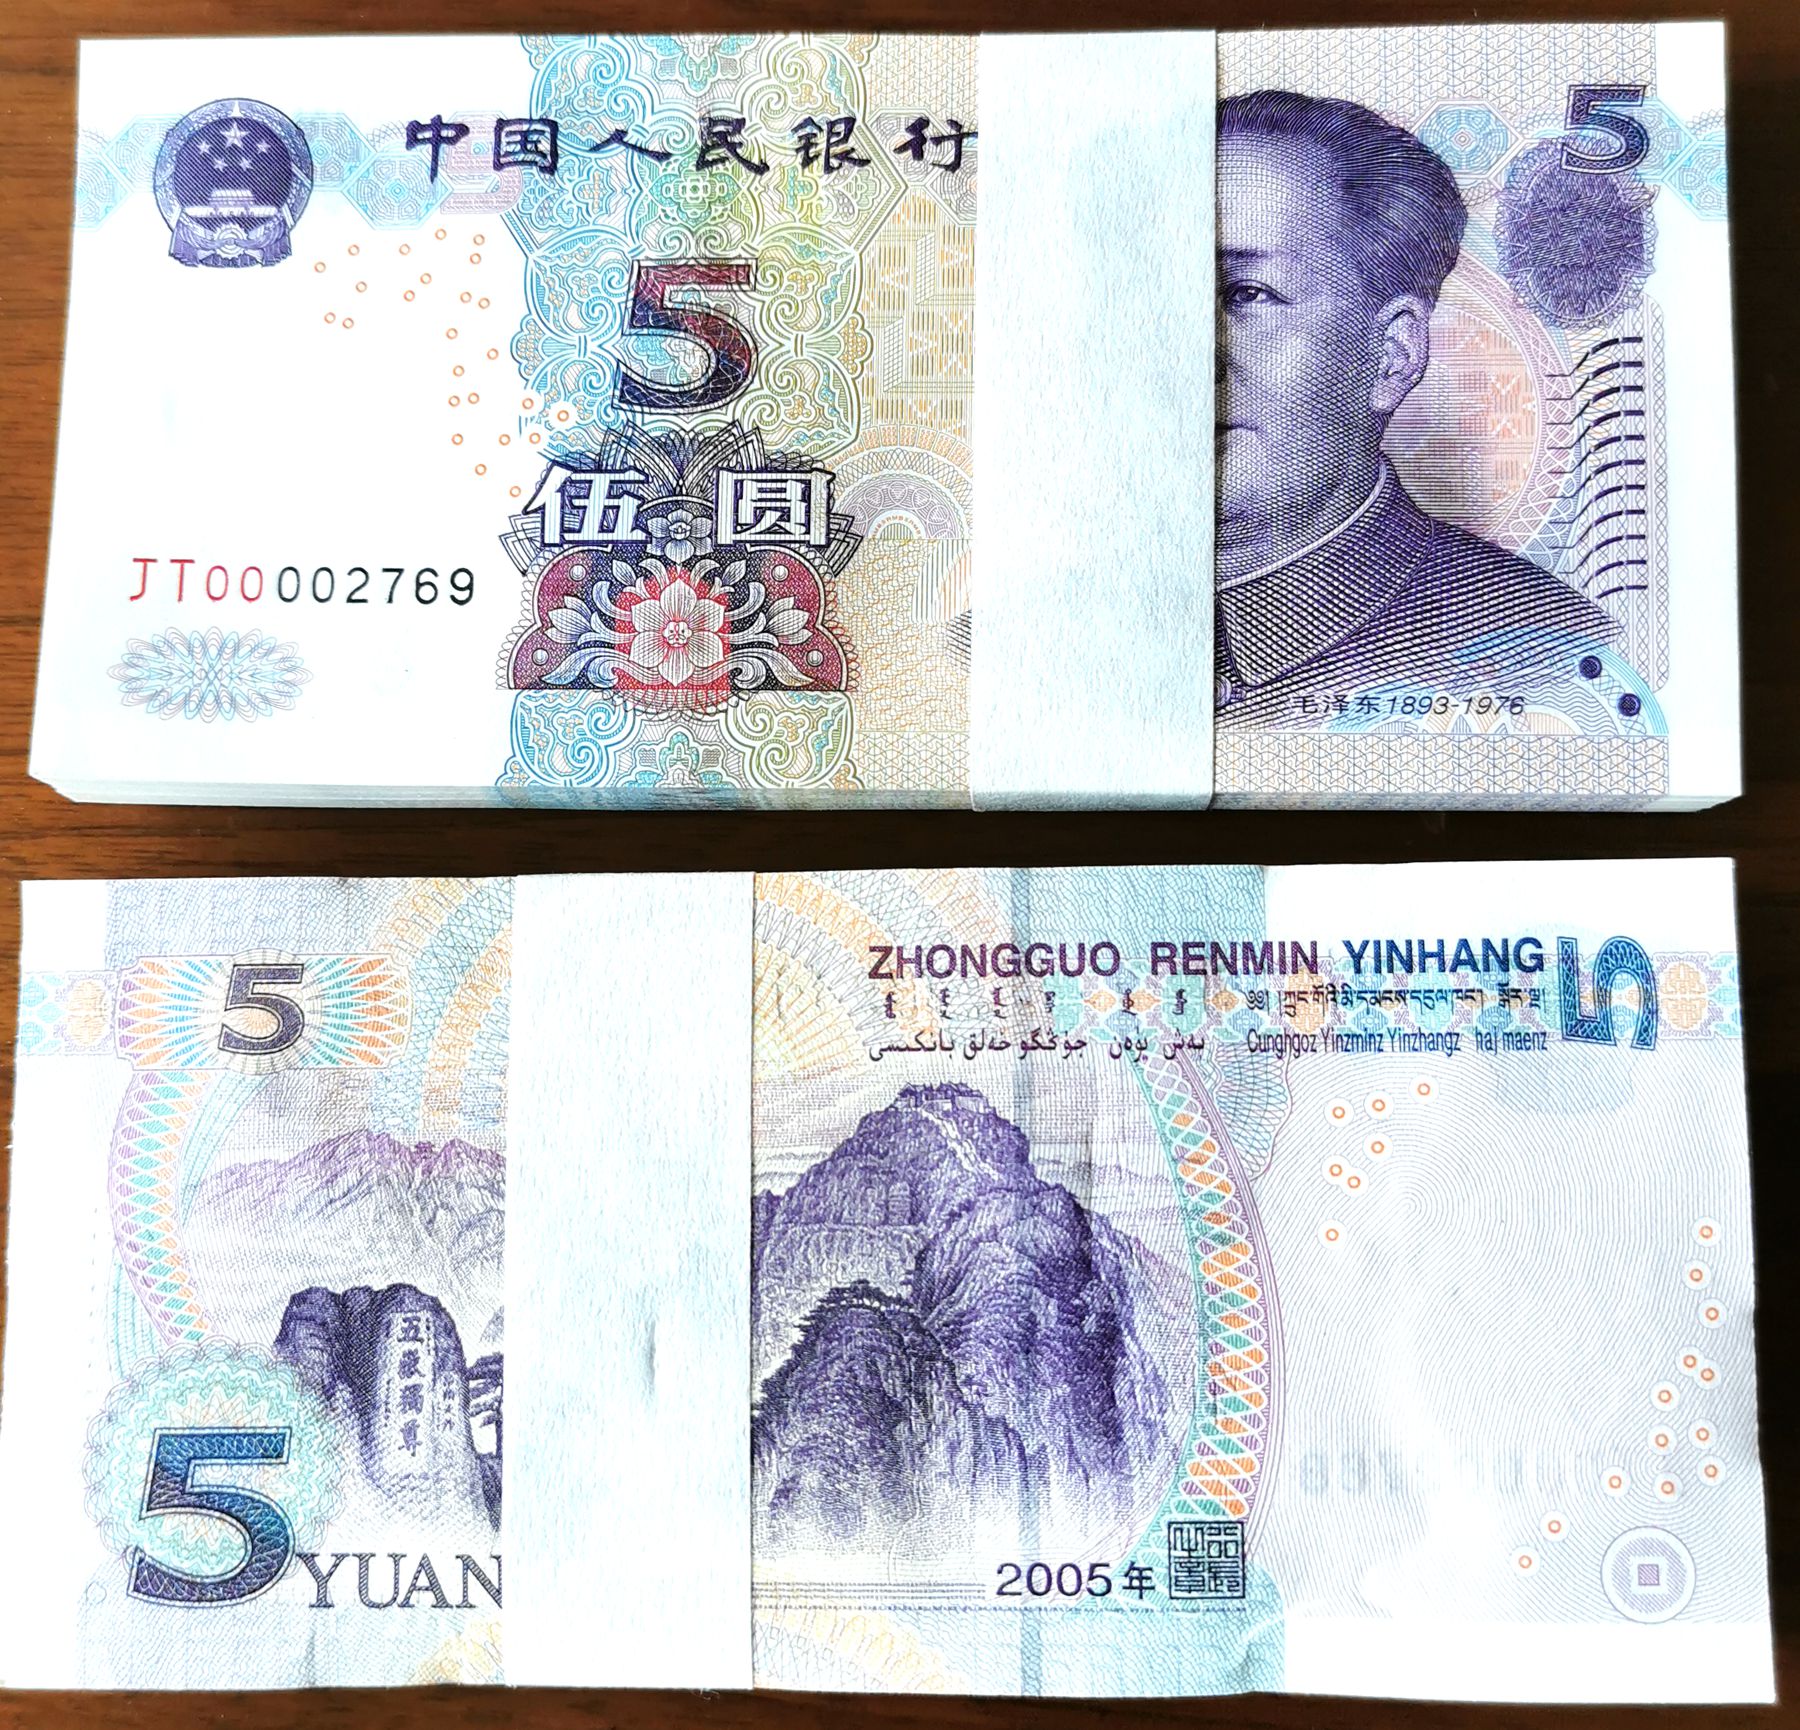 N0104, China 100 Pieces Five 5 Yuan Banknotes, 2005 Issue